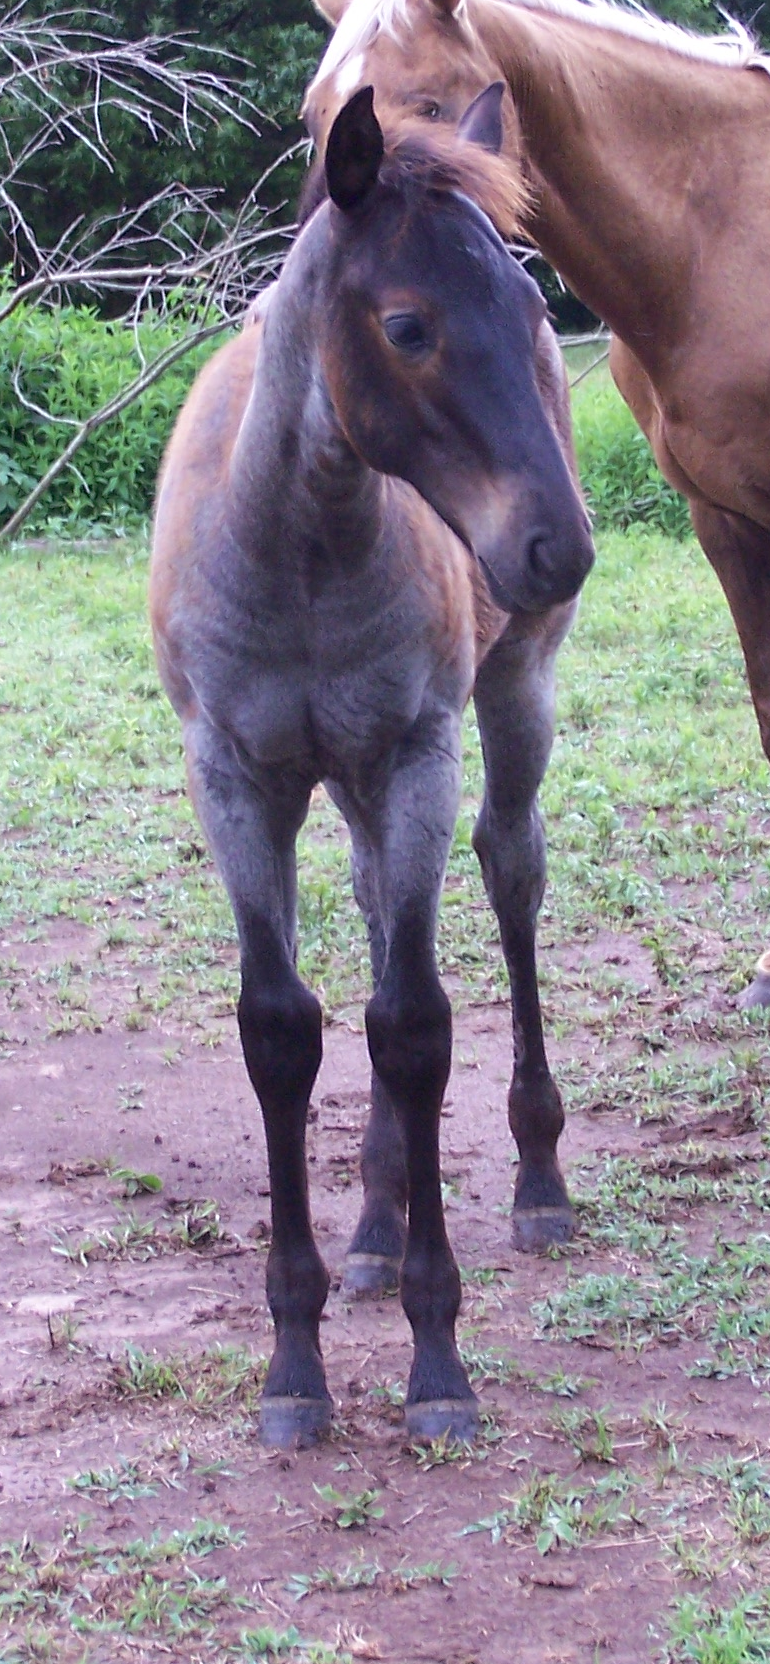 The same blue roan colt with a very faded coat